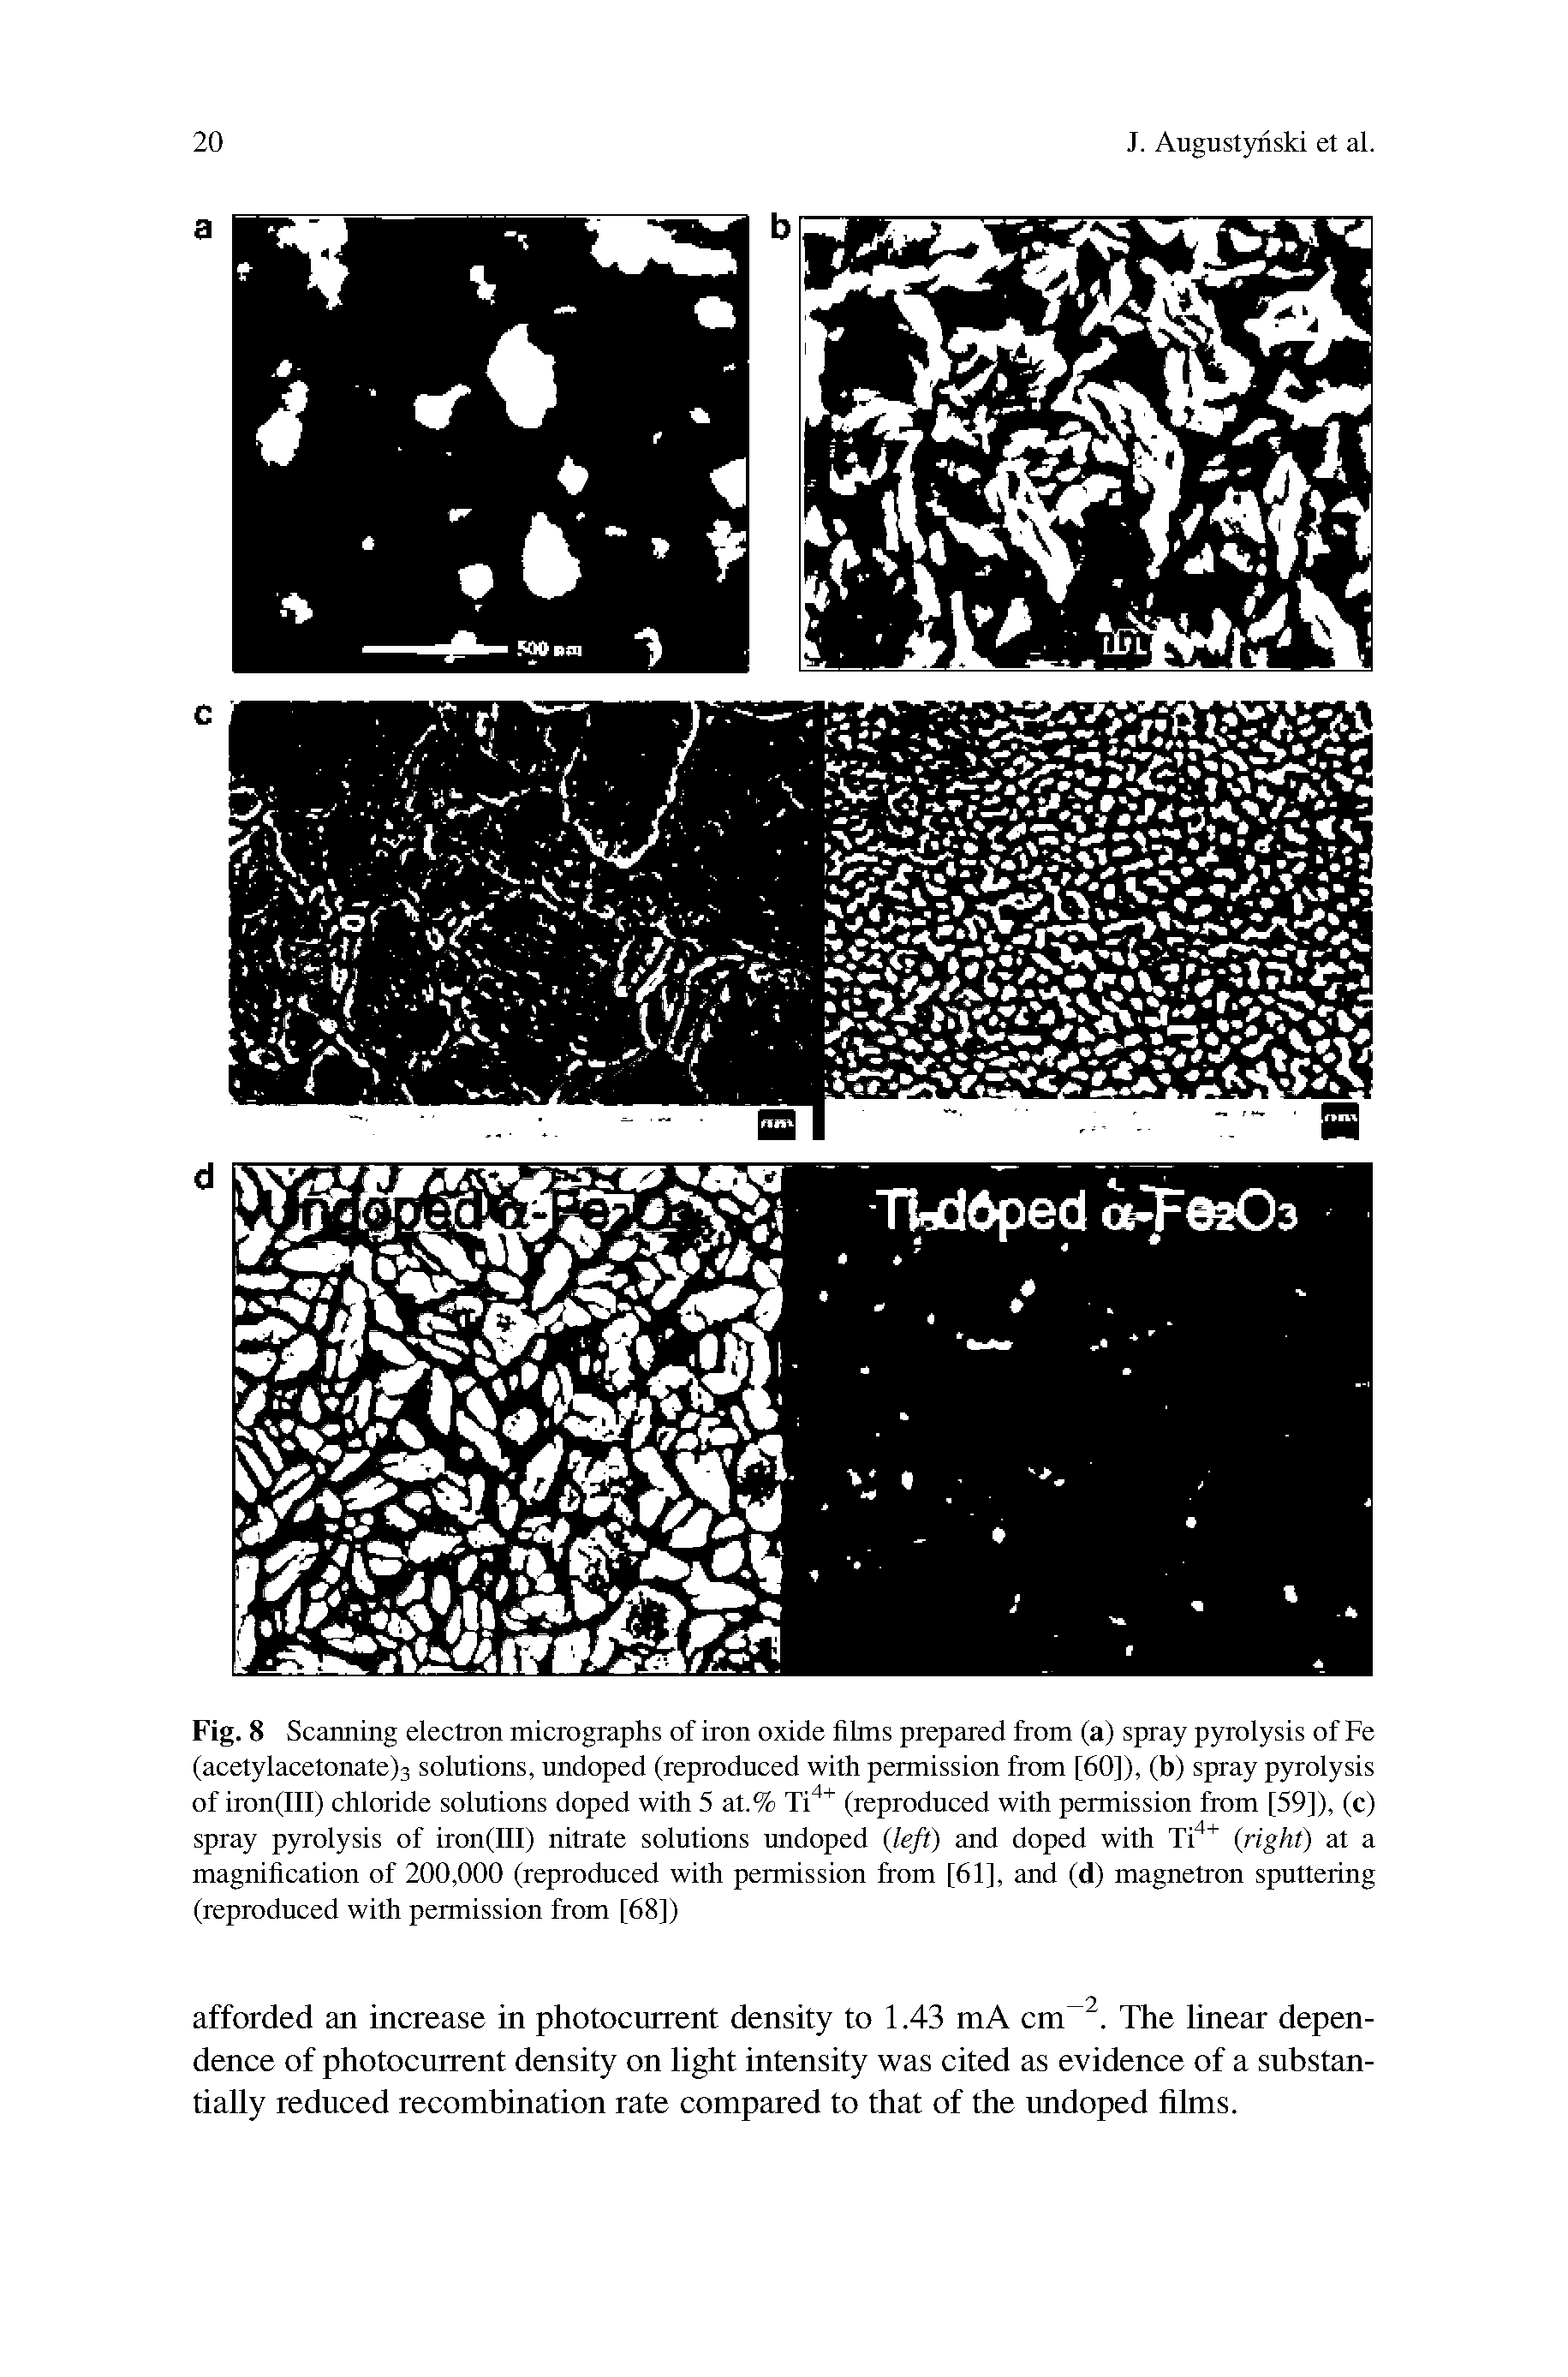 Fig. 8 Scanning electron micrographs of iron oxide films prepared from (a) spray pyrolysis of Fe (acetylacetonate)3 solutions, undoped (reproduced with permission from [60]), (b) spray pyrolysis of iron(III) chloride solutions doped with 5 at.% Ti (reproduced with permission from [59]), (c) spray pyrolysis of iron(III) nitrate solutions undoped left) and doped with Ti eight) at a magnification of 200,000 (reproduced with permission from [61], and (d) magnetron sputtering (reproduced with permission from [68])...